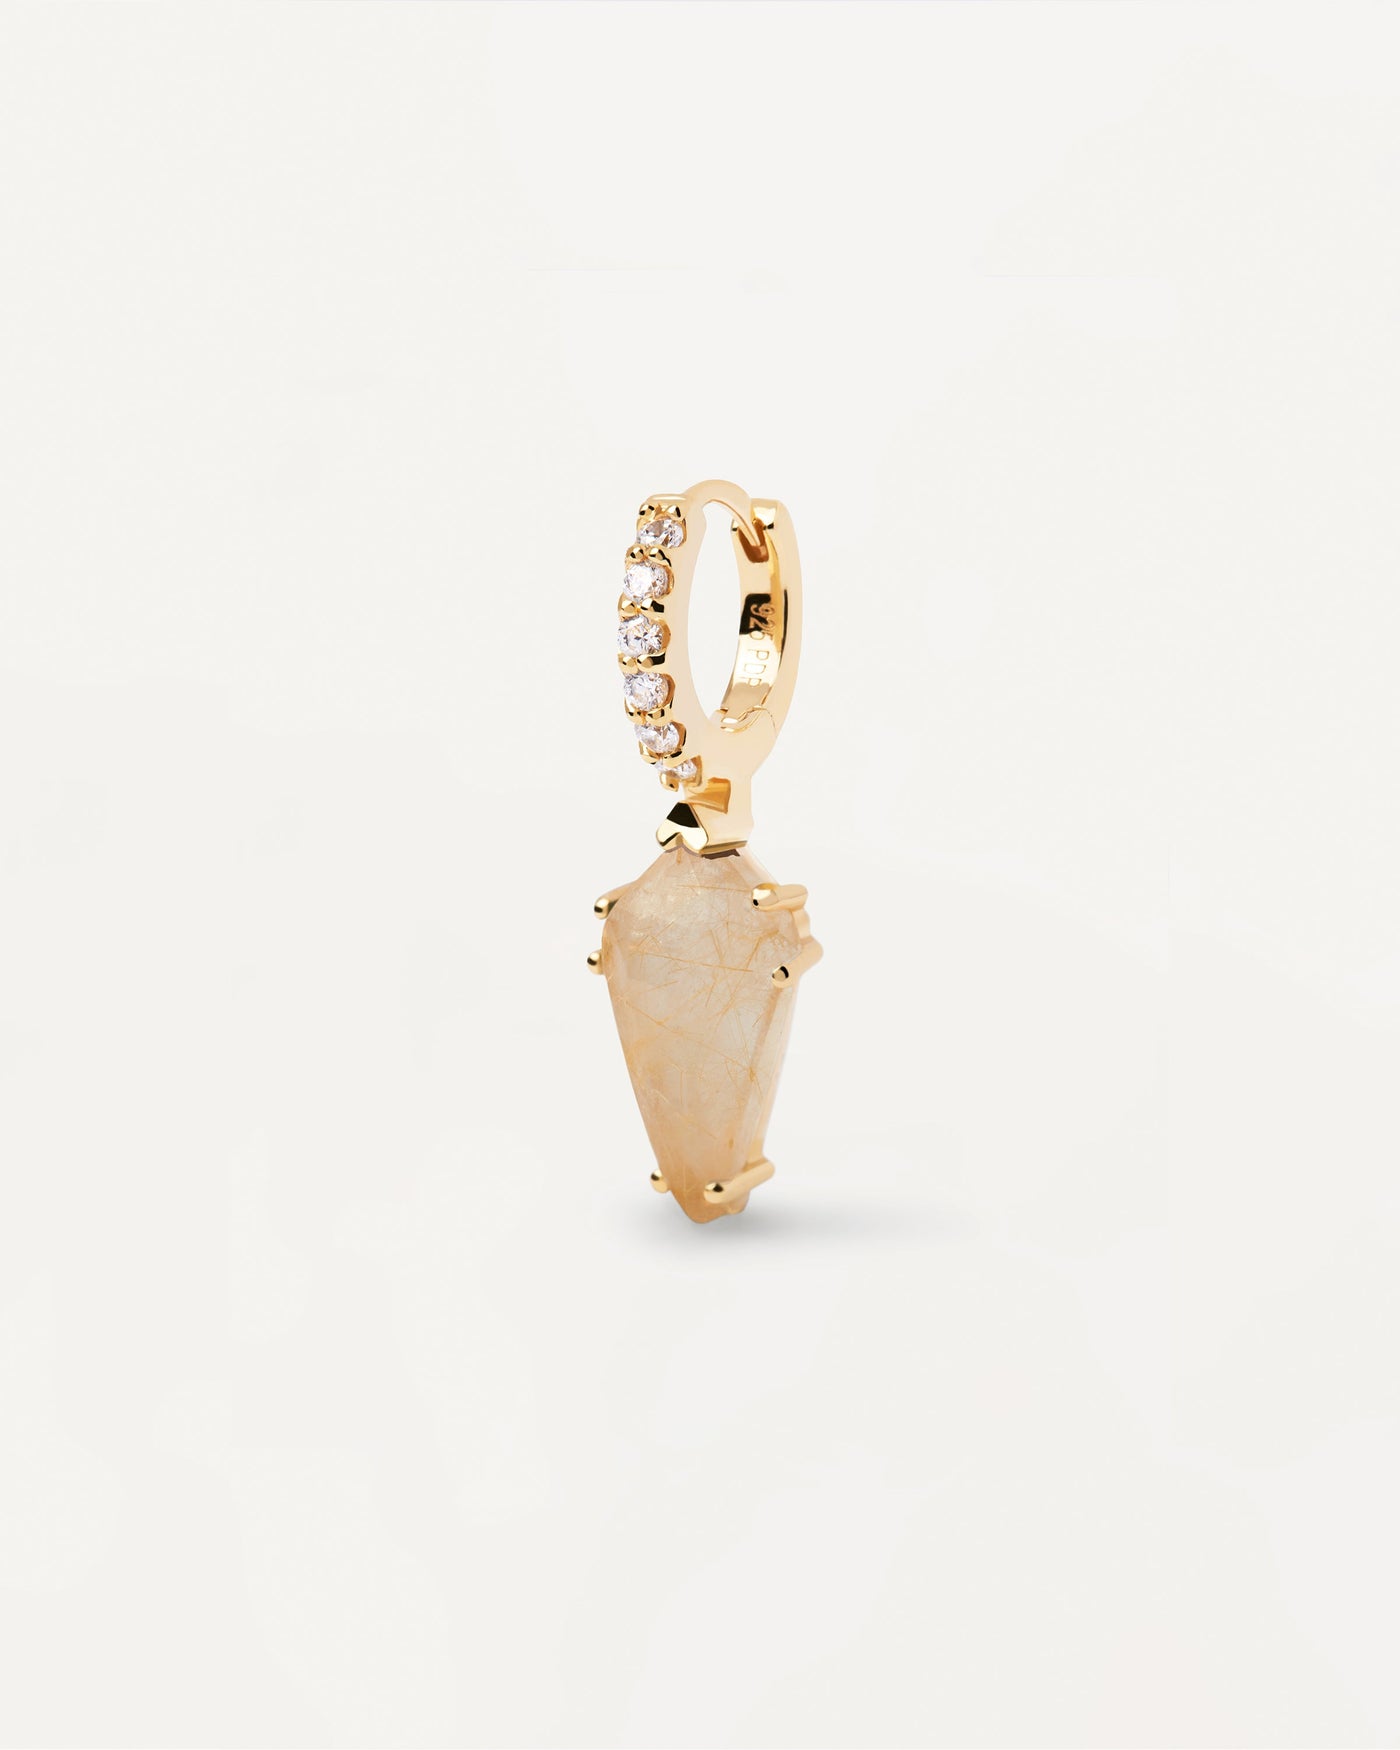 2023 Selection | Naoki Rutilated Quartz Single Earring. Gold-plated hoop ear piercing with white zirconia and beige pointed gemstone pendant. Get the latest arrival from PDPAOLA. Place your order safely and get this Best Seller. Free Shipping.